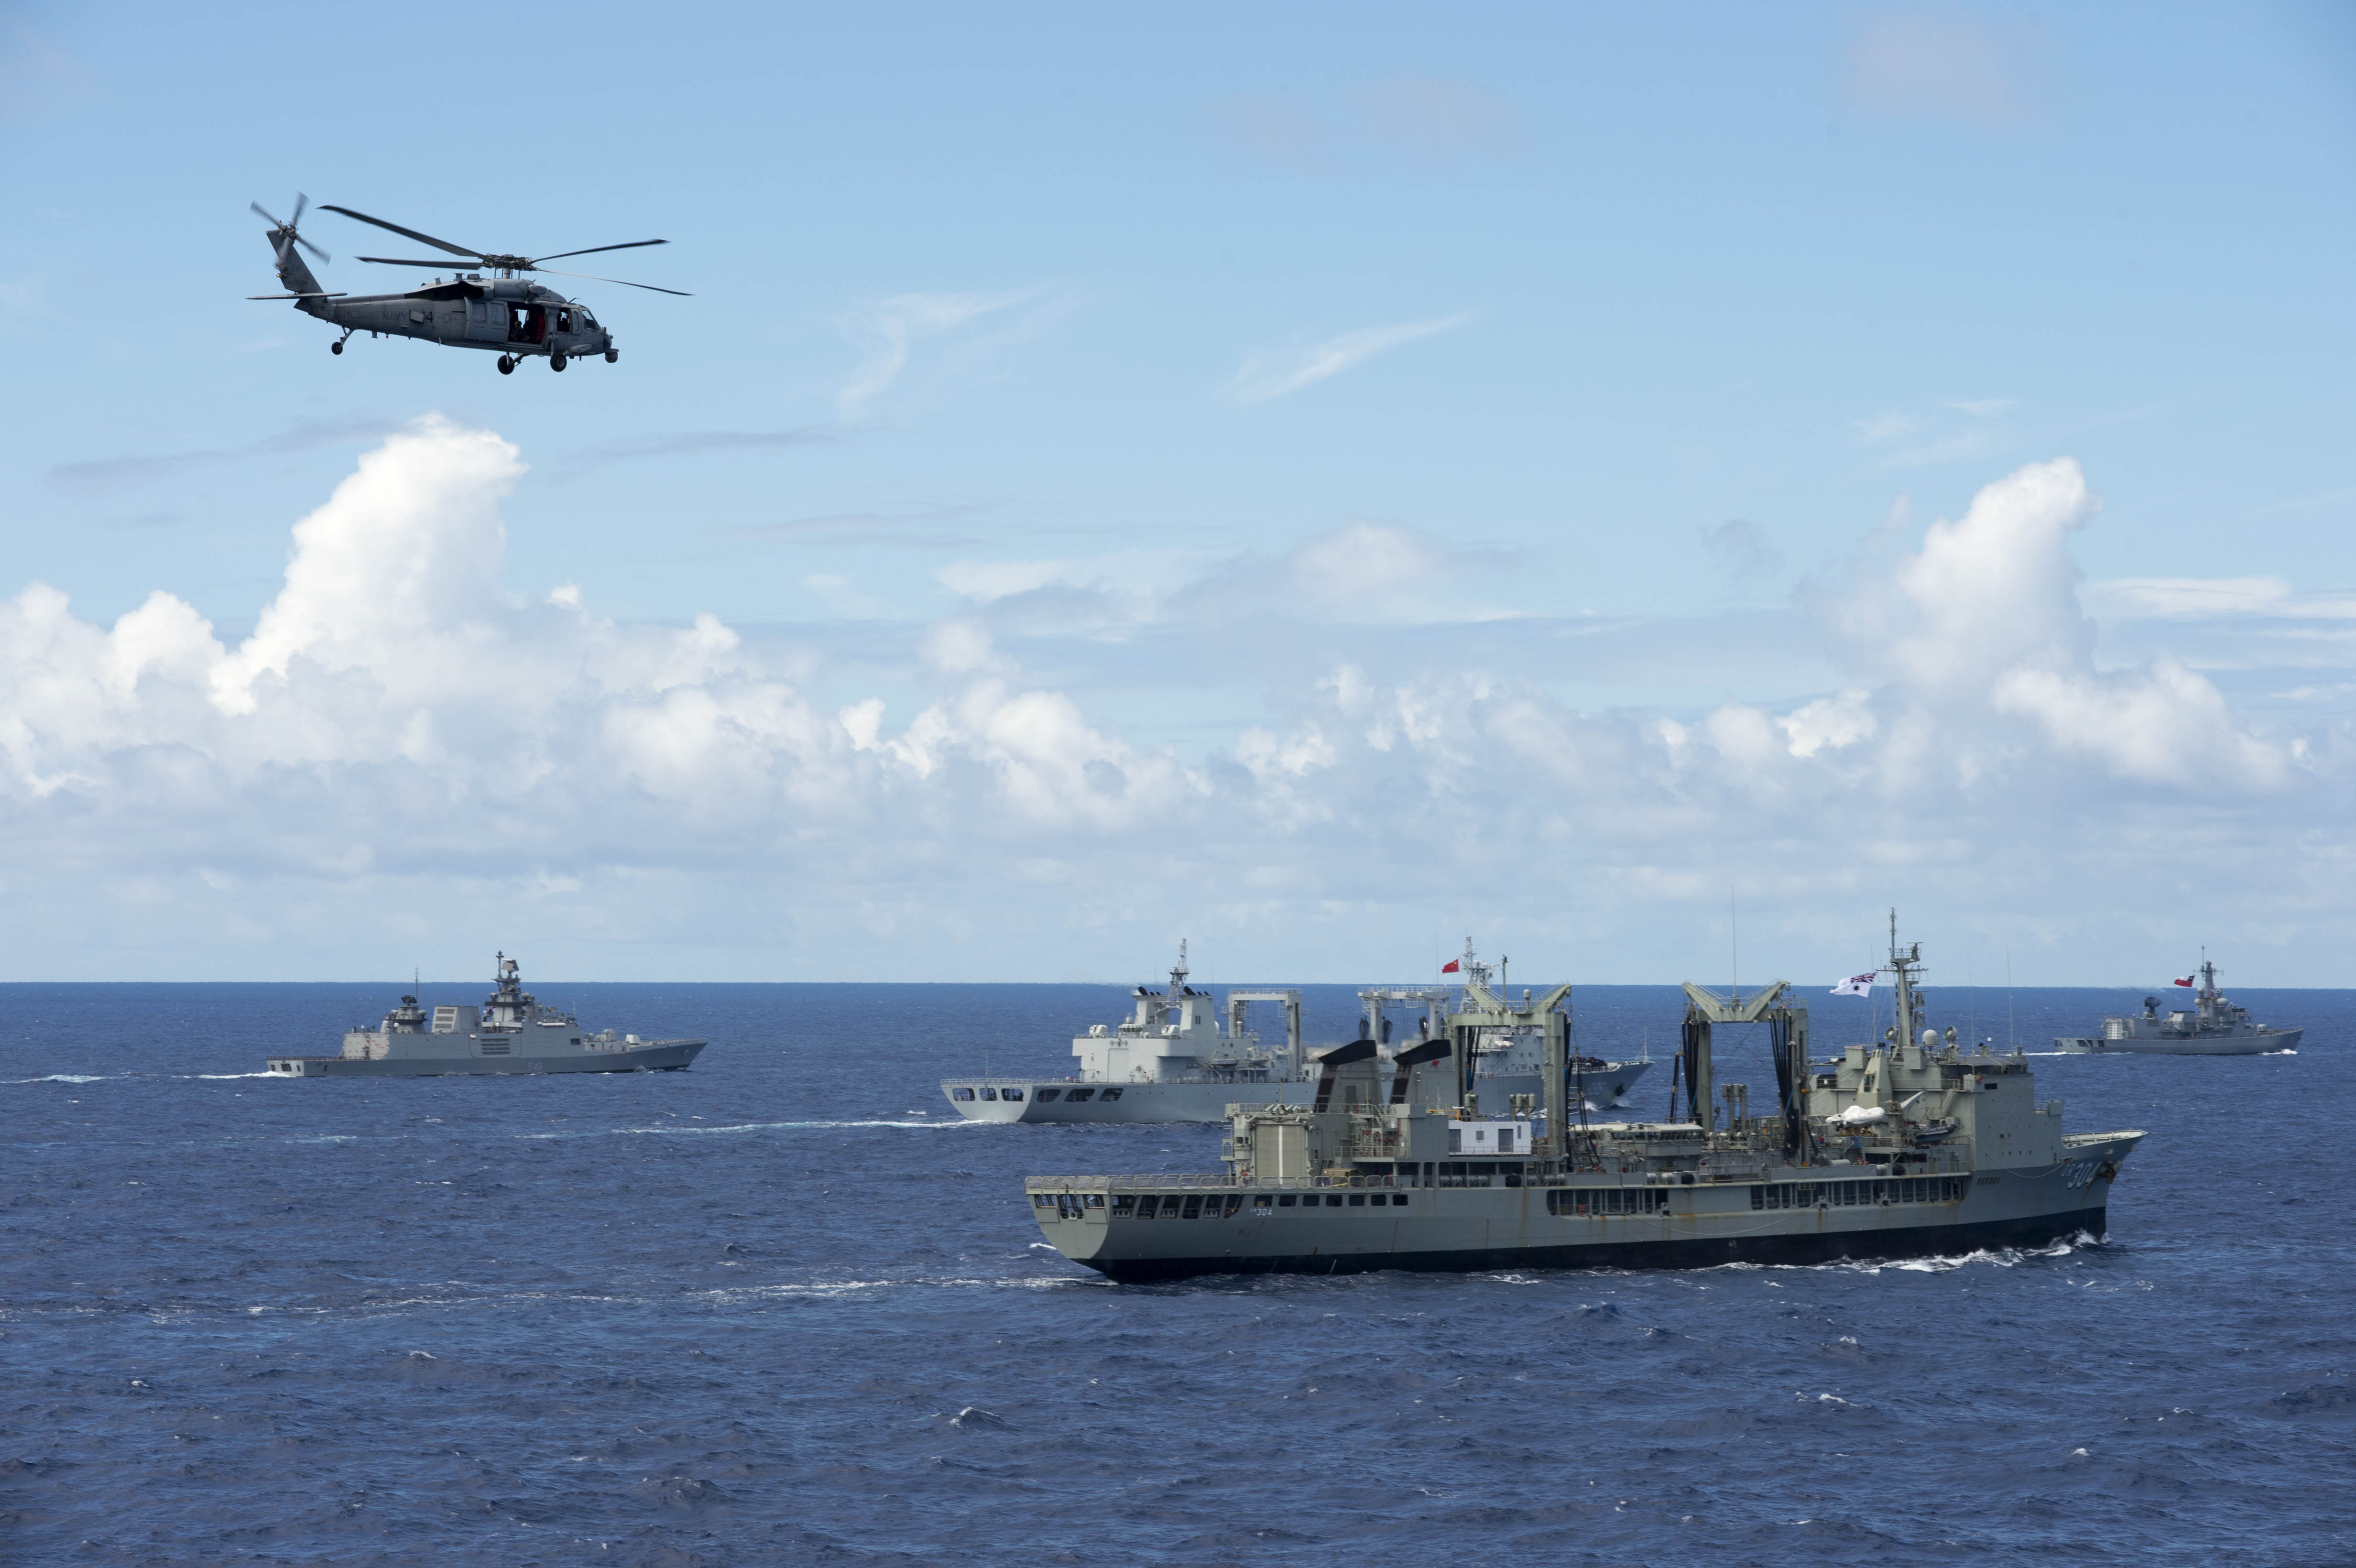 An MH-60S Sea Hawk helicopter assigned to Helicopter Sea Combat Squadron (HSC) 4 flies over several countries' ships in formation during a photo exercise for Rim of the Pacific (RIMPAC) Exercise 2014. US Navy photo.